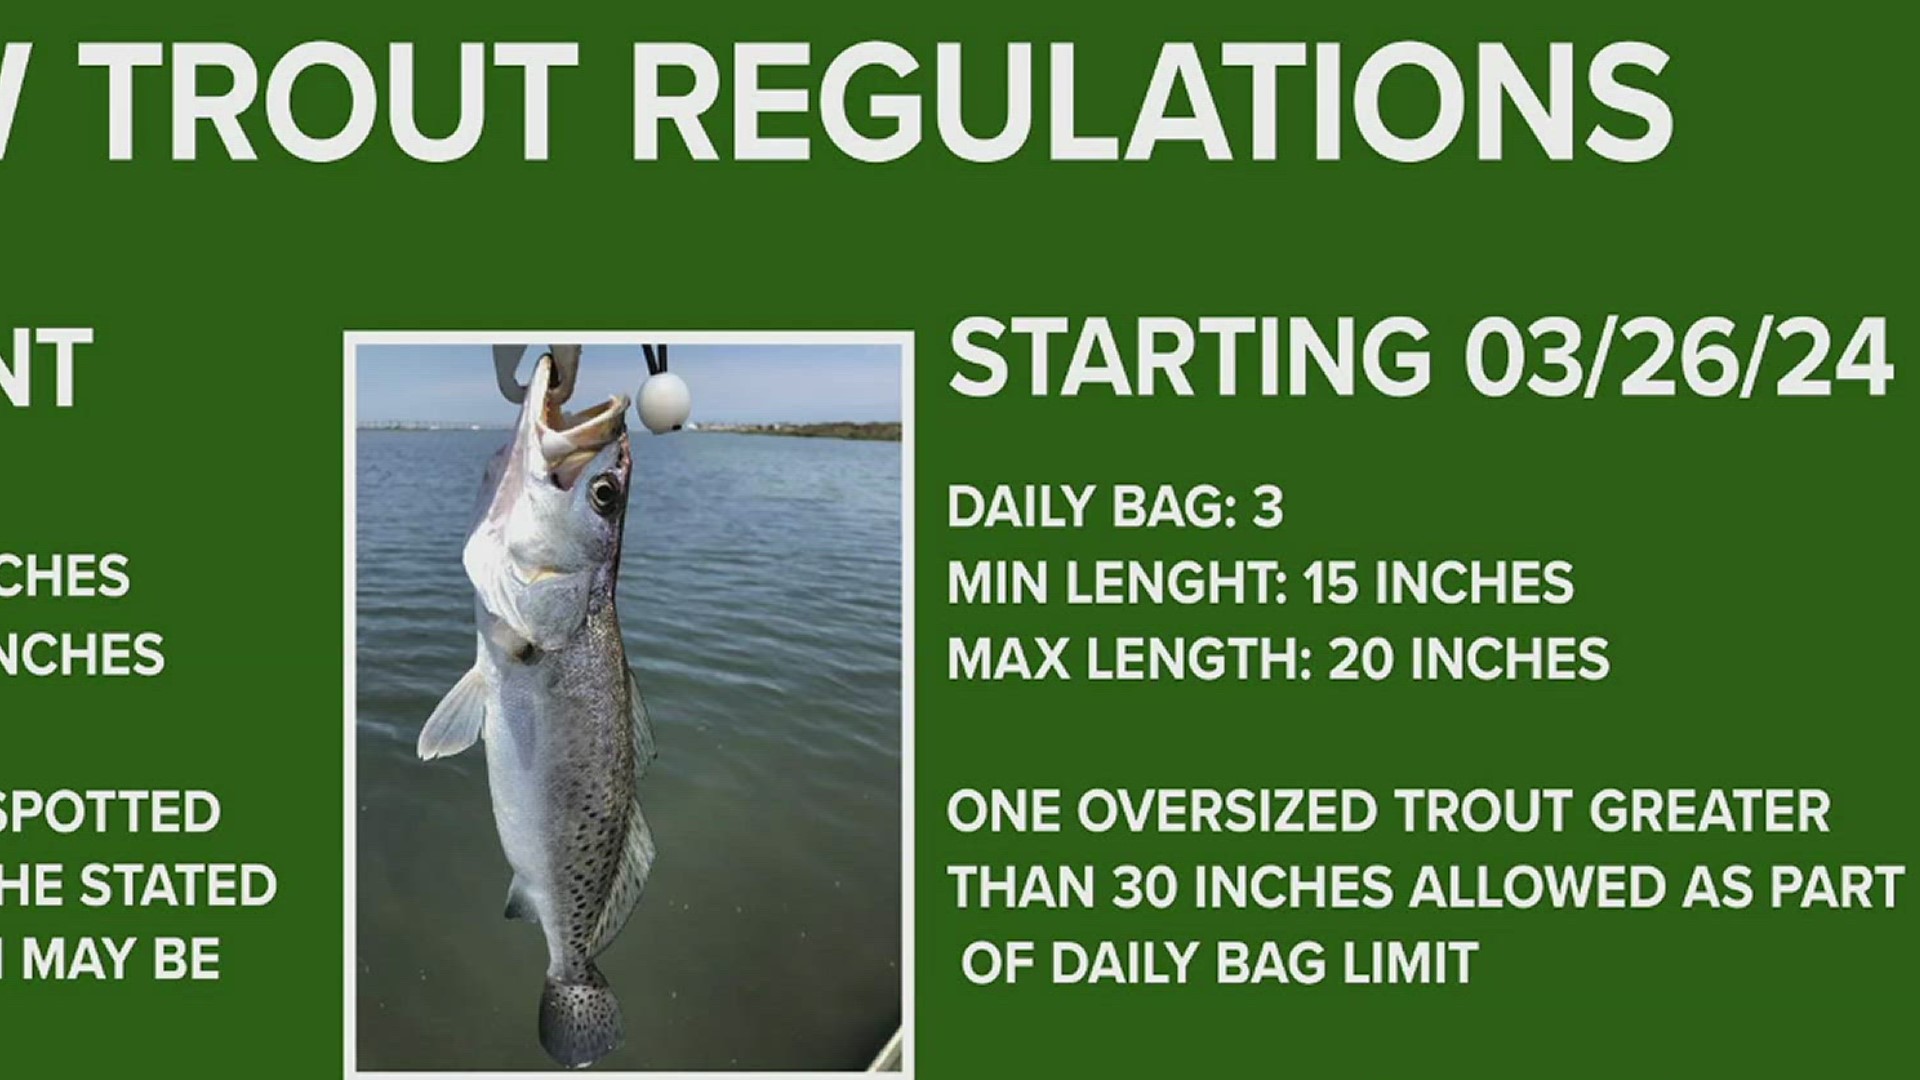 Beginning next Tuesday, the daily bag limit will decrease from five per day to just three.